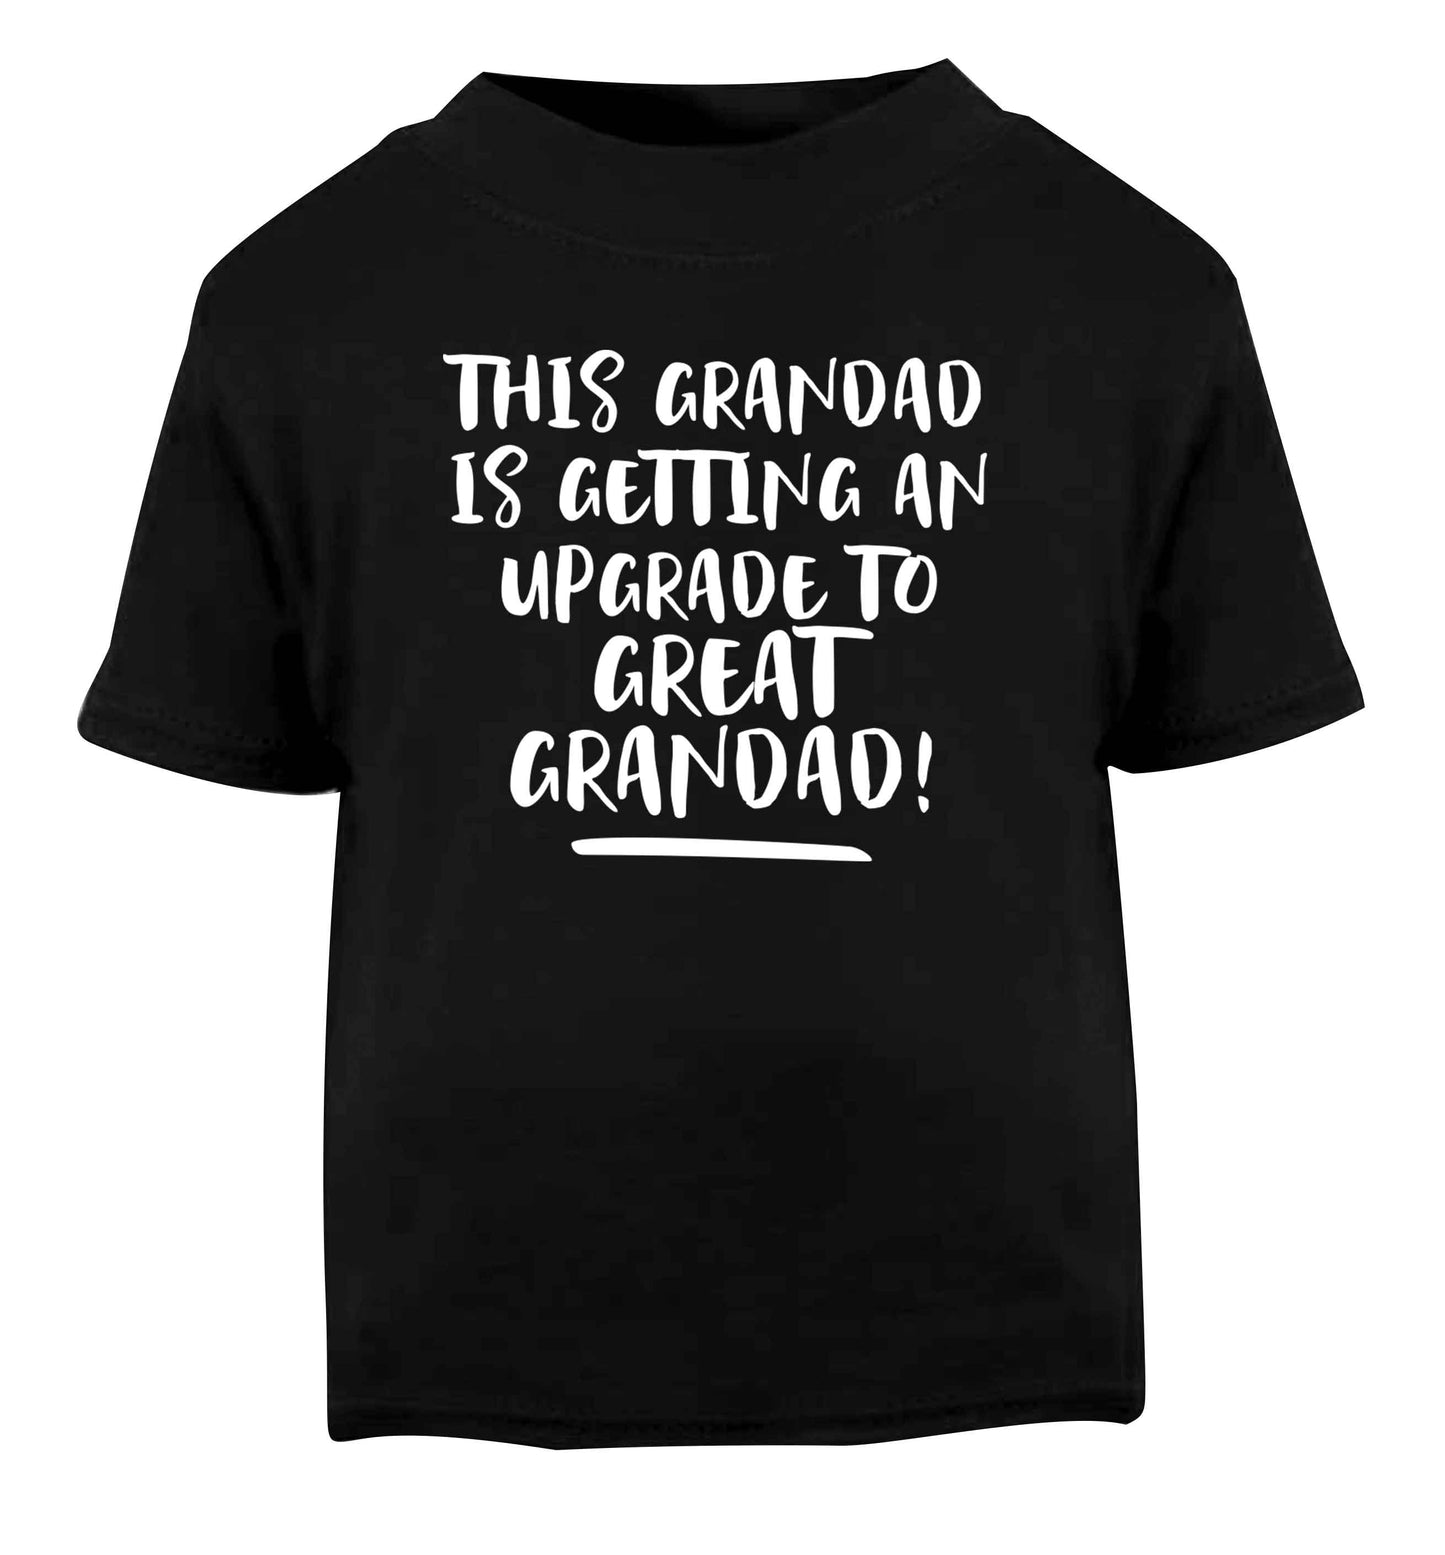 This grandad is getting an upgrade to great grandad! Black Baby Toddler Tshirt 2 years